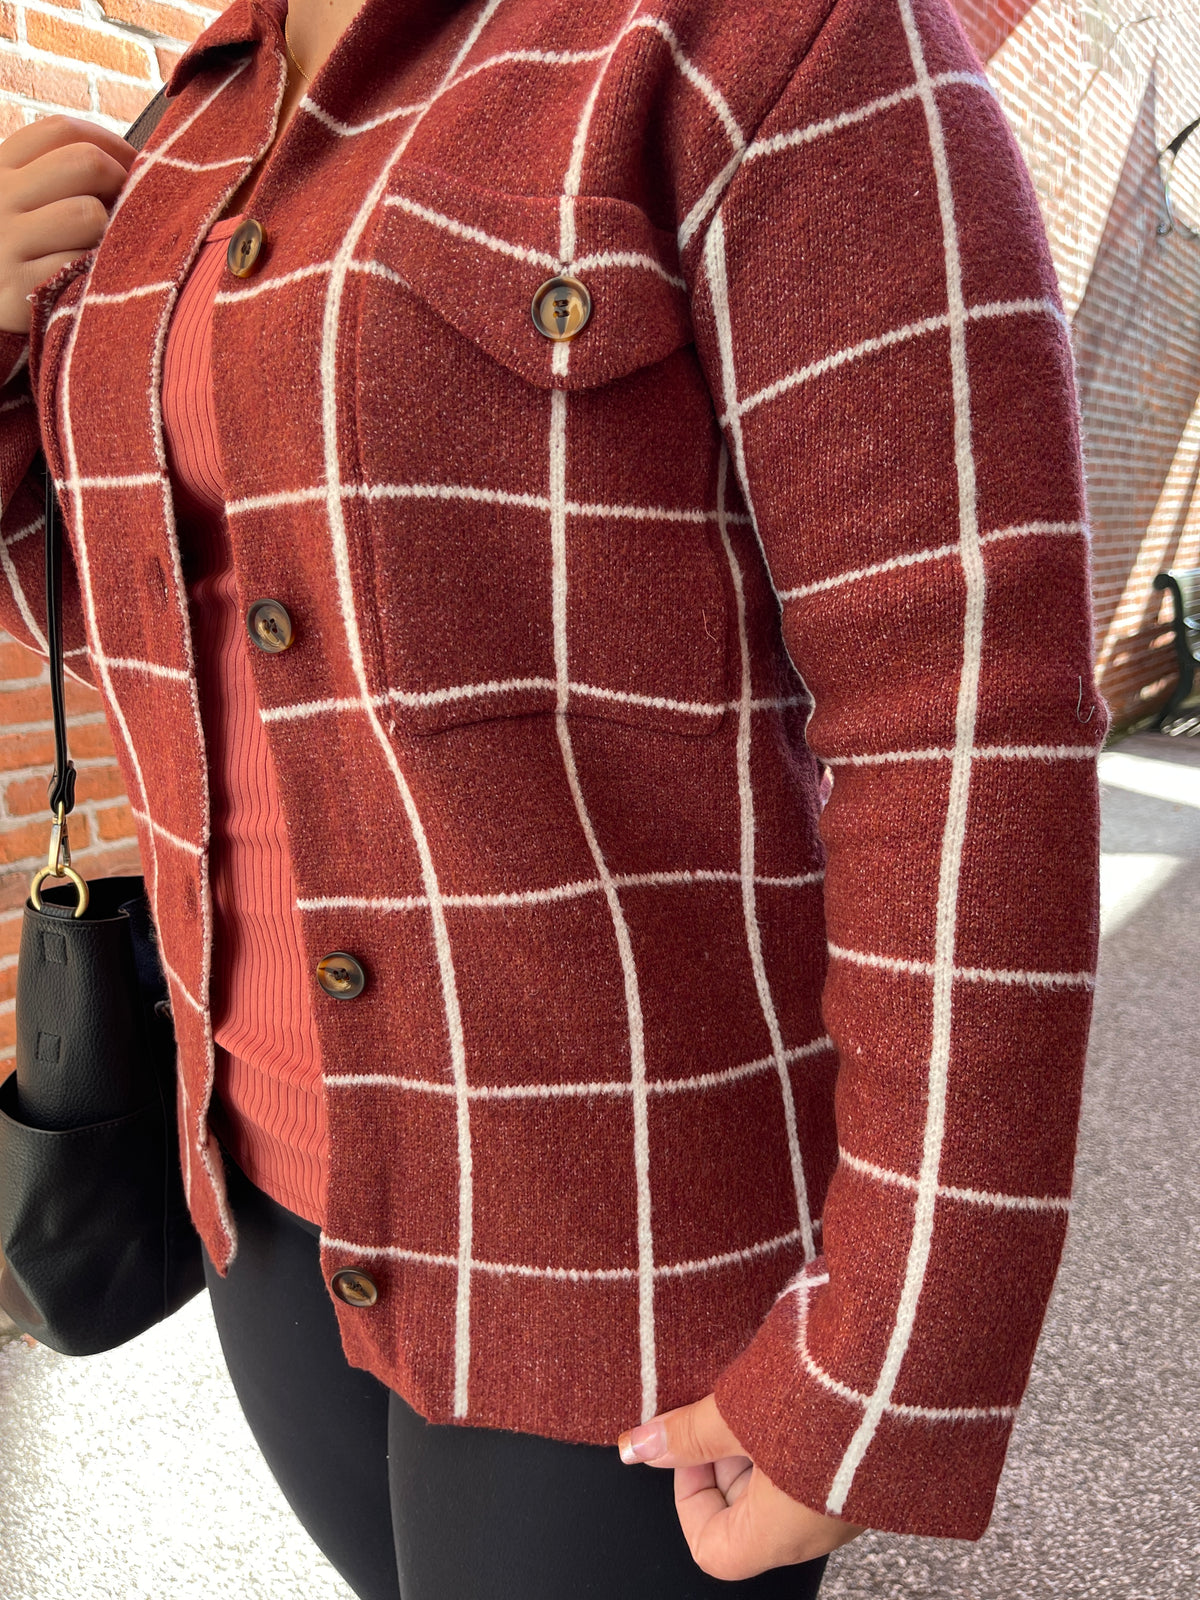 COPPER PLAID CHECK BUTTON DOWN SWEATER/JACKET